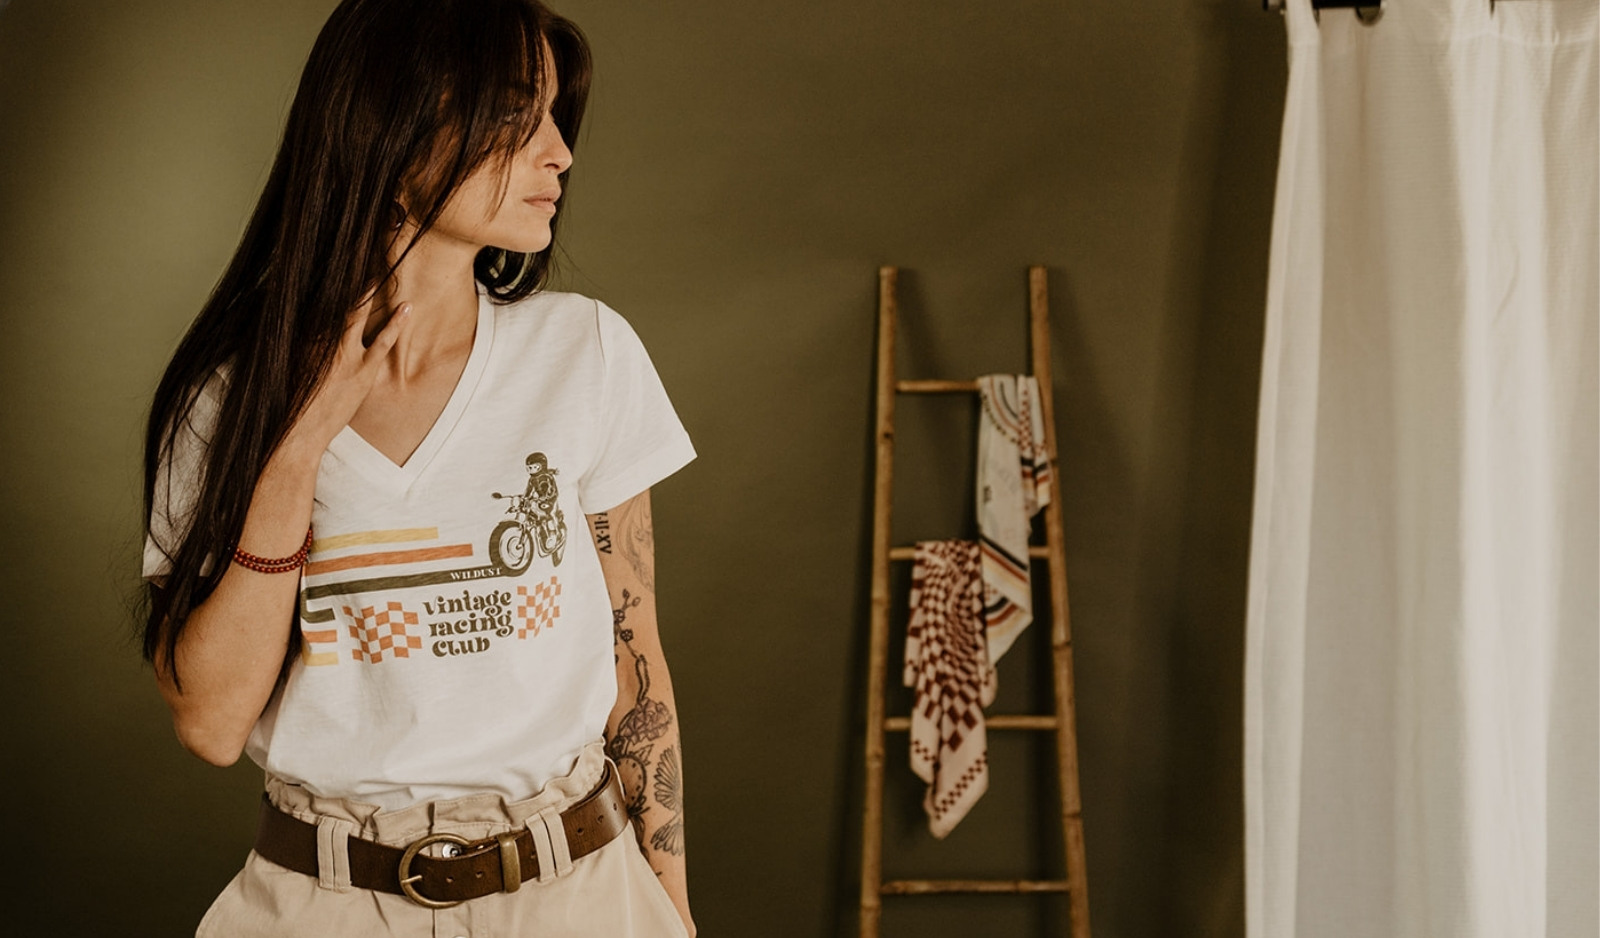 t-shirt for women who rides and wants to be free